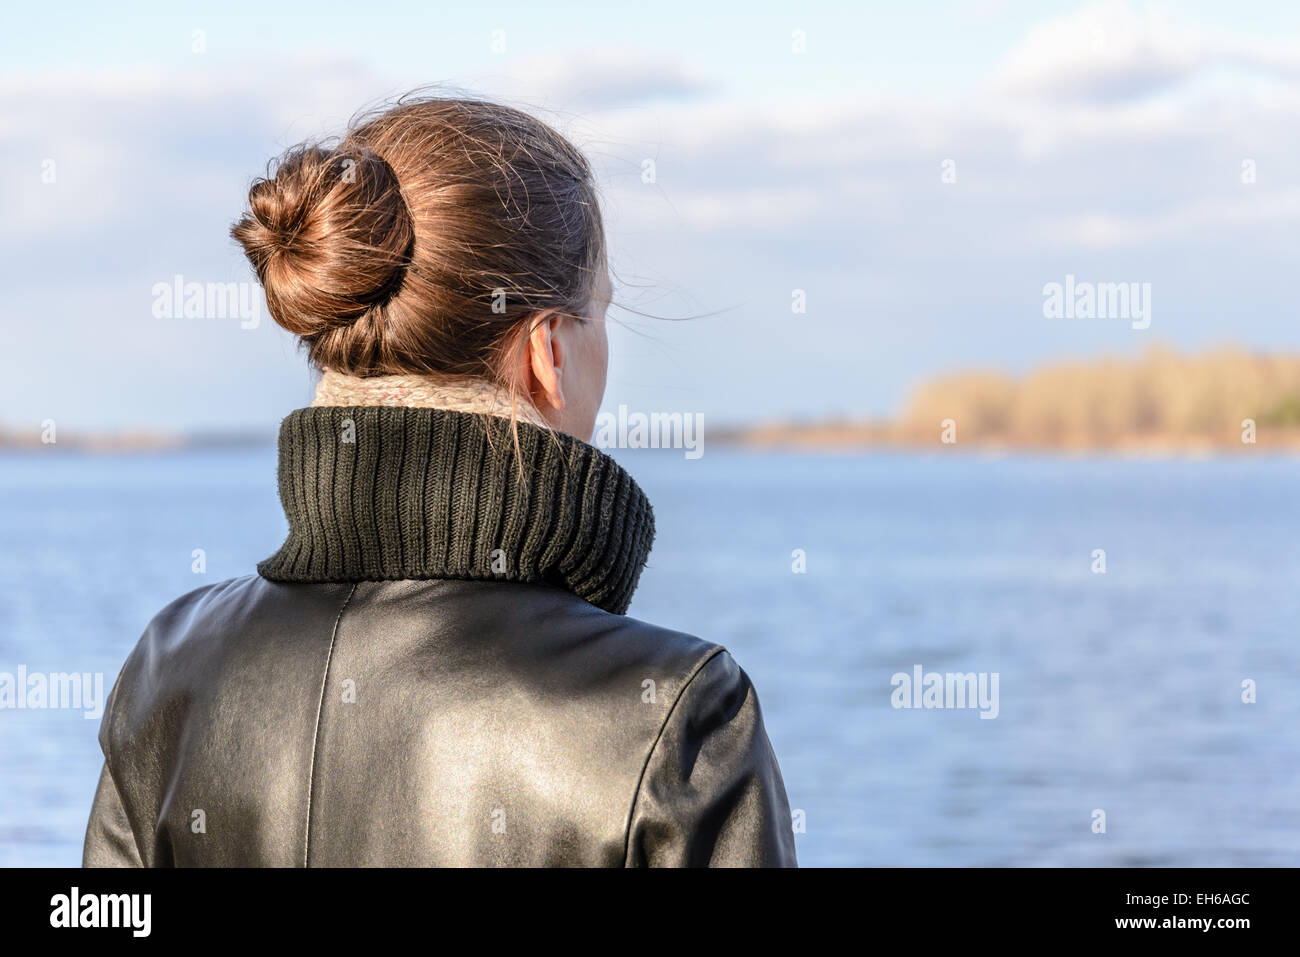 A woman with a chignon and a black leather coat is watching the landscape close to the lake or the river during a sunny day with Stock Photo